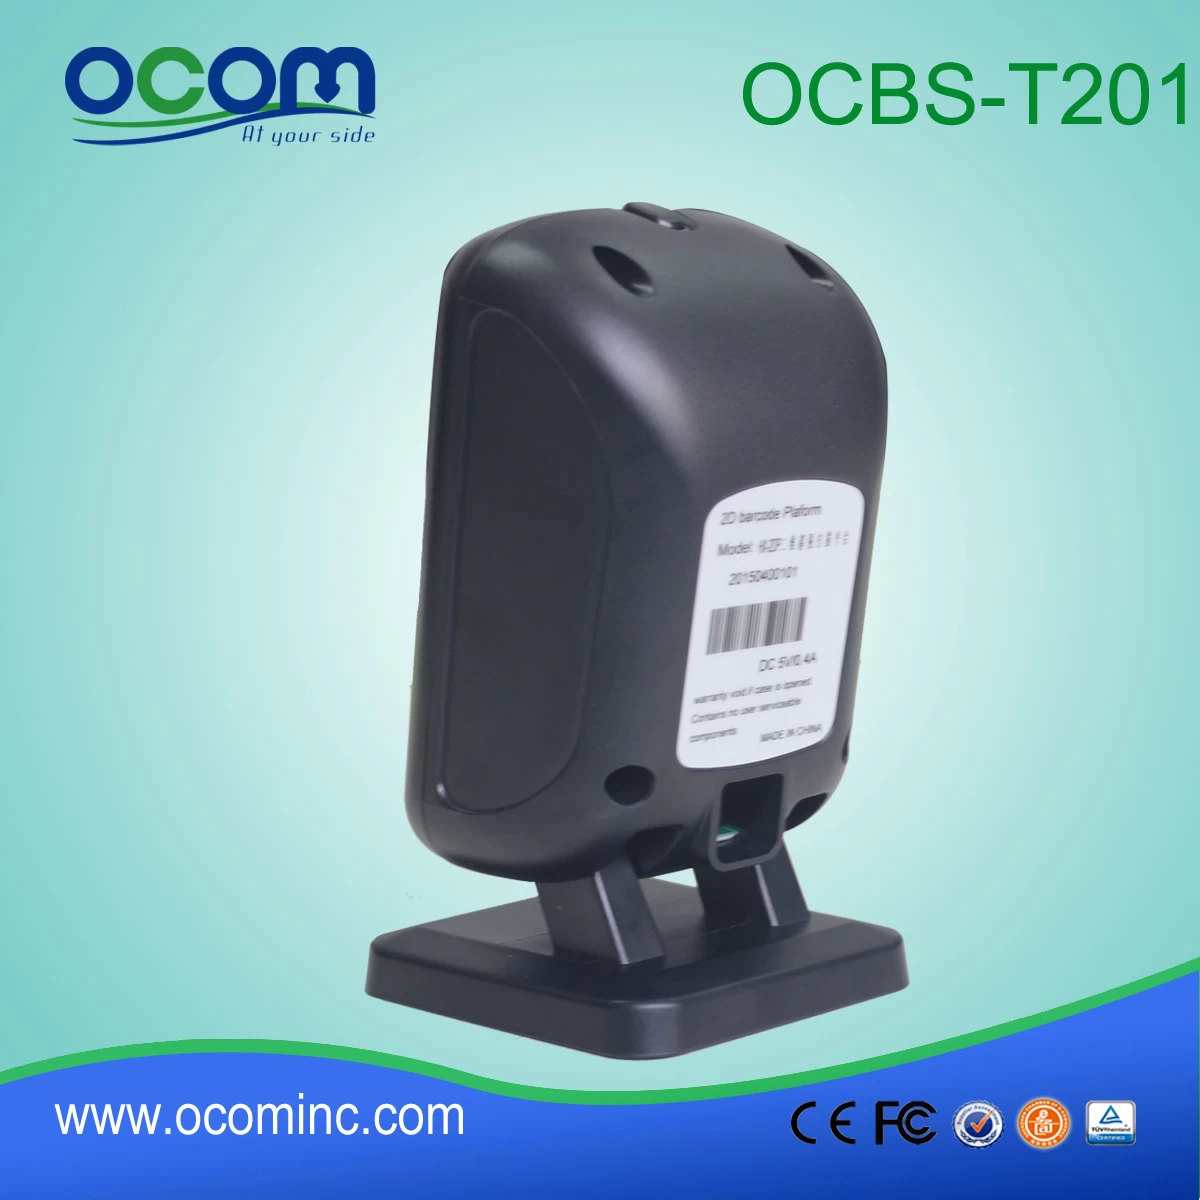 2015 newest 2D Omni-directionaI Image Barcode Scanner OCBS-T201